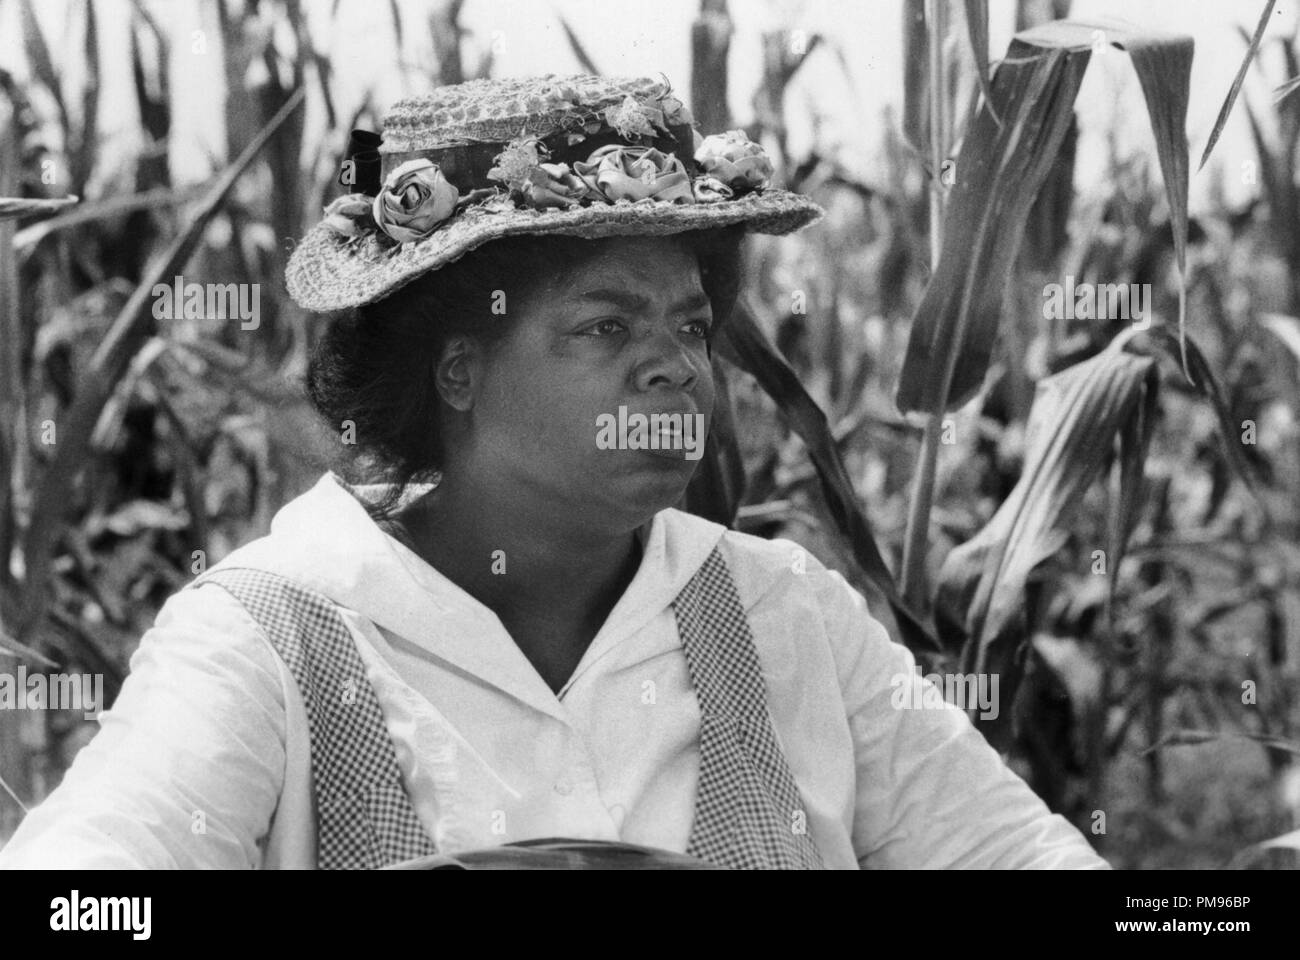 Studio Publicity Still from 'The Color Purple' Oprah Winfrey © 1985 Warner All Rights Reserved   File Reference # 31703071THA  For Editorial Use Only Stock Photo